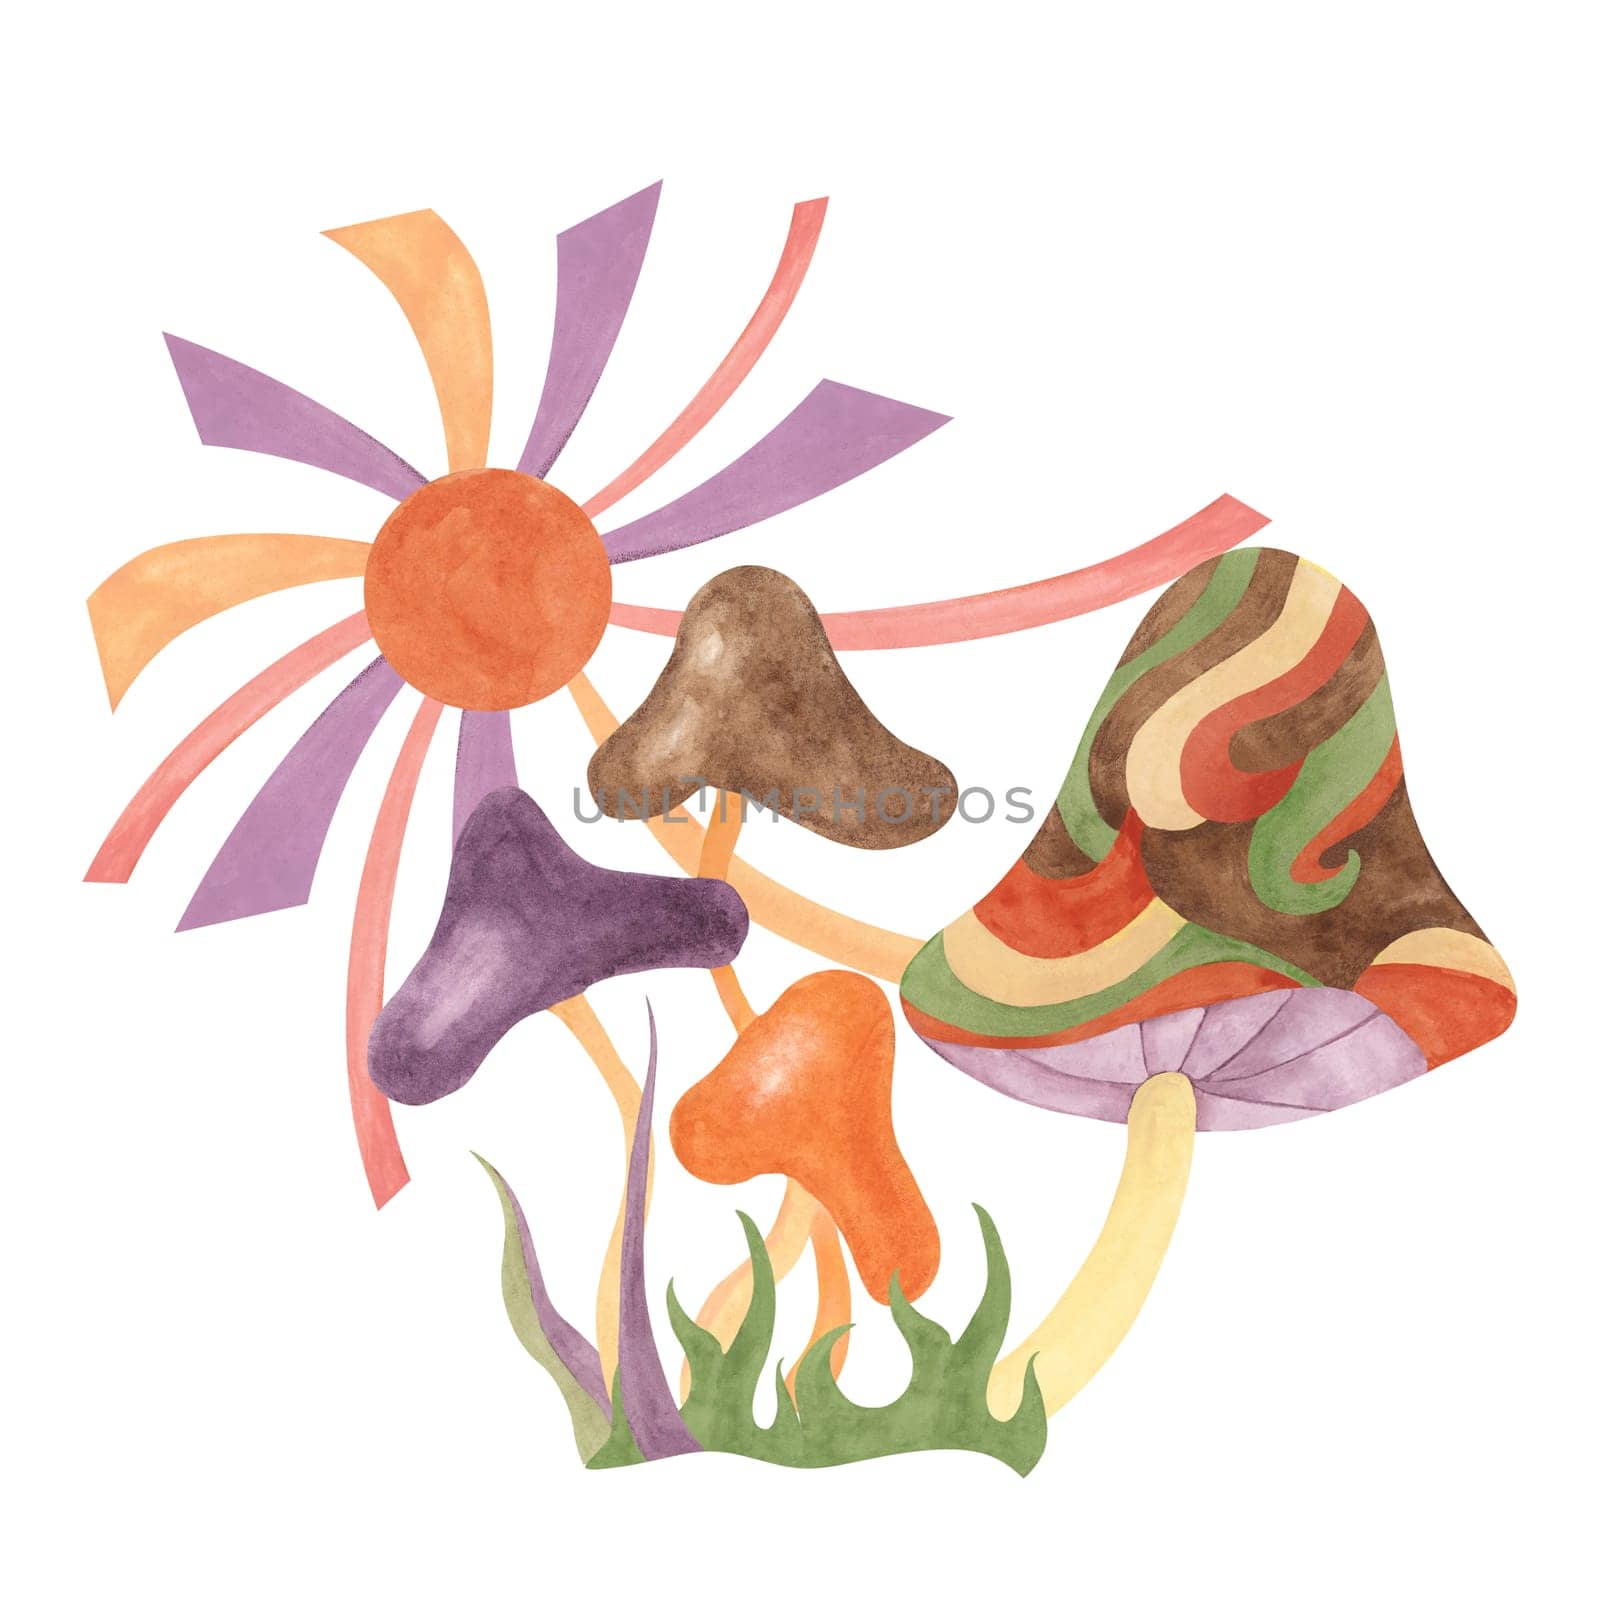 Retro hippie mushroom and sun in 1970s style. Hippie psychedelic groovy fungus clipart. Watercolor indie illustration for flower power sticker, nostalgic design, printing, quote, t-shirt cartoon style